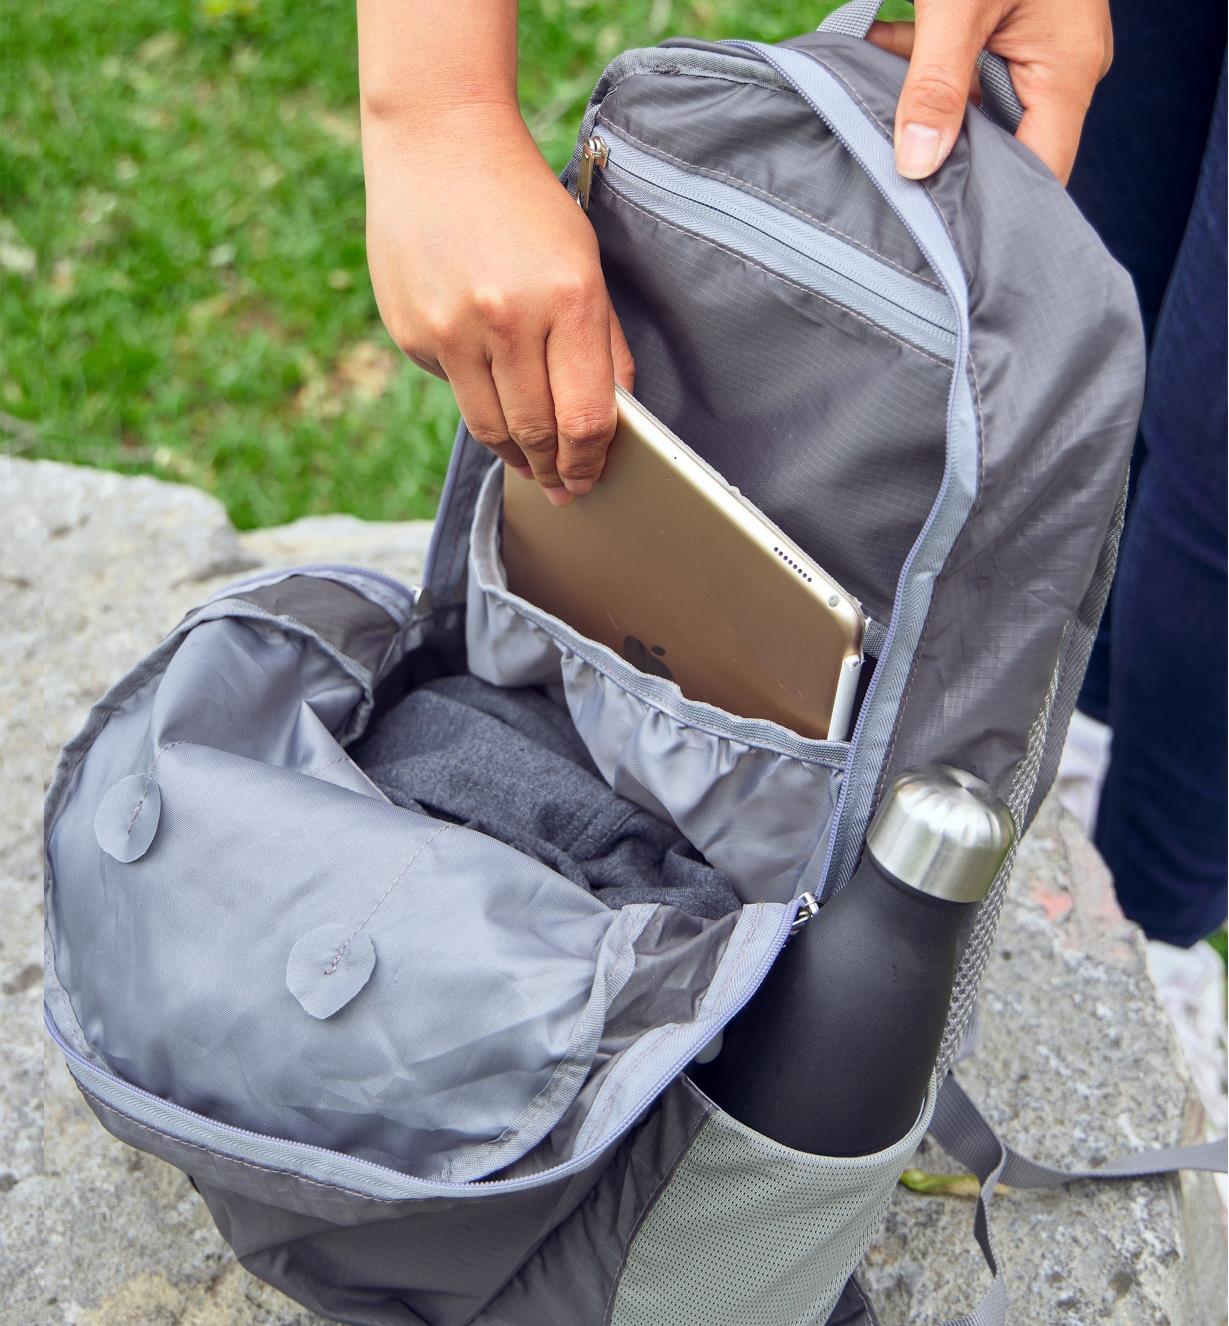 A notebook being removed from an open packable backpack